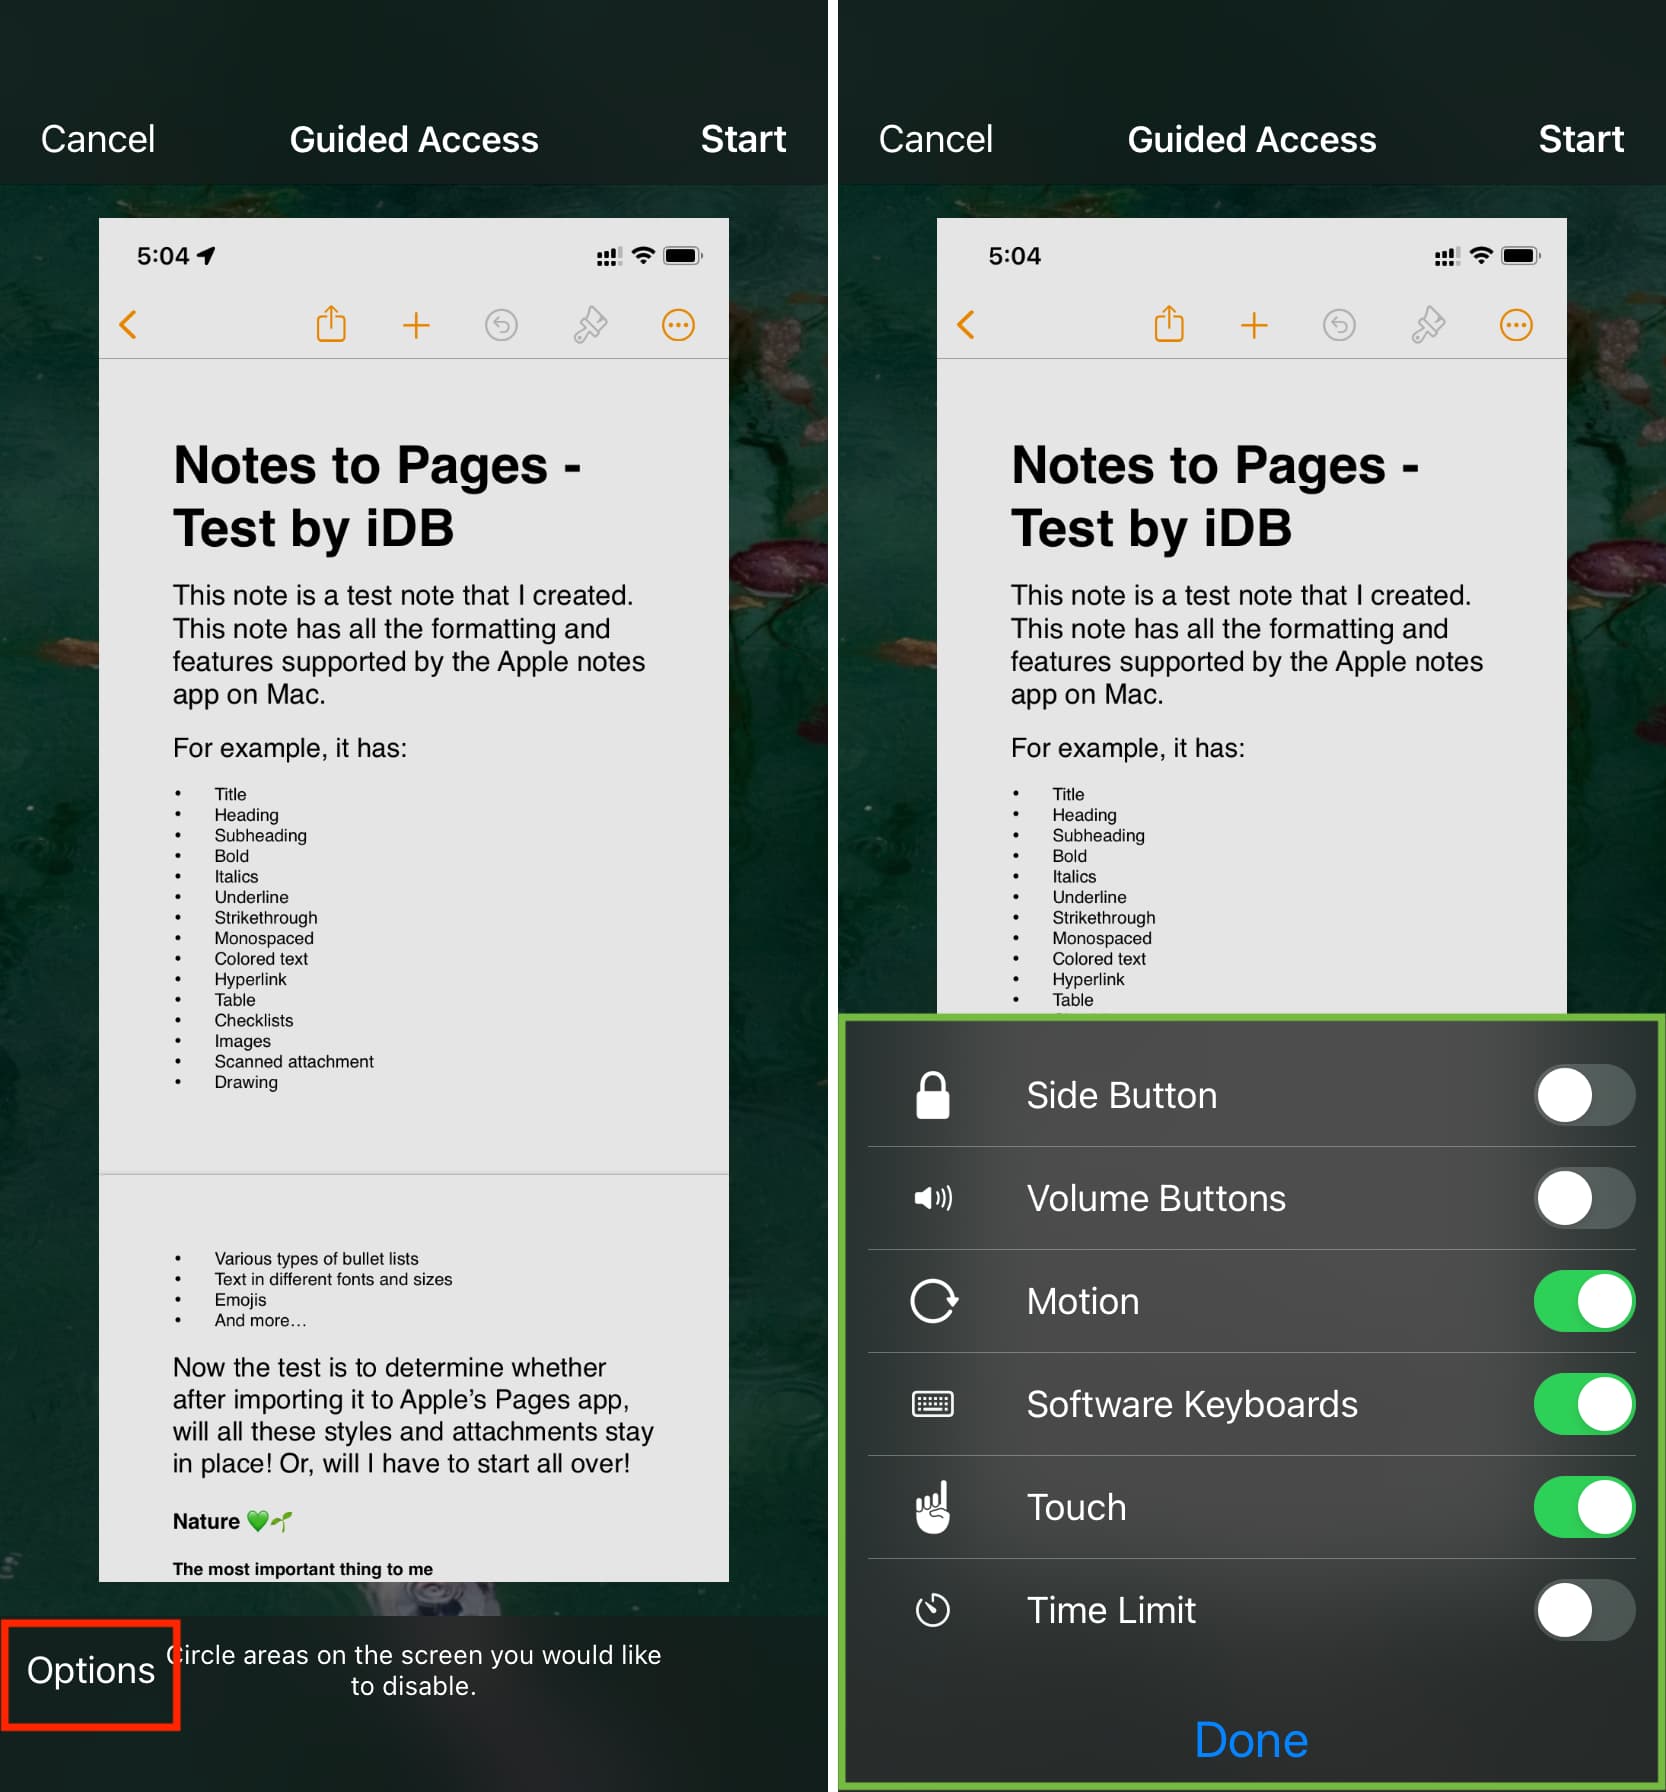 Adjust Guided Access Options on iPhone